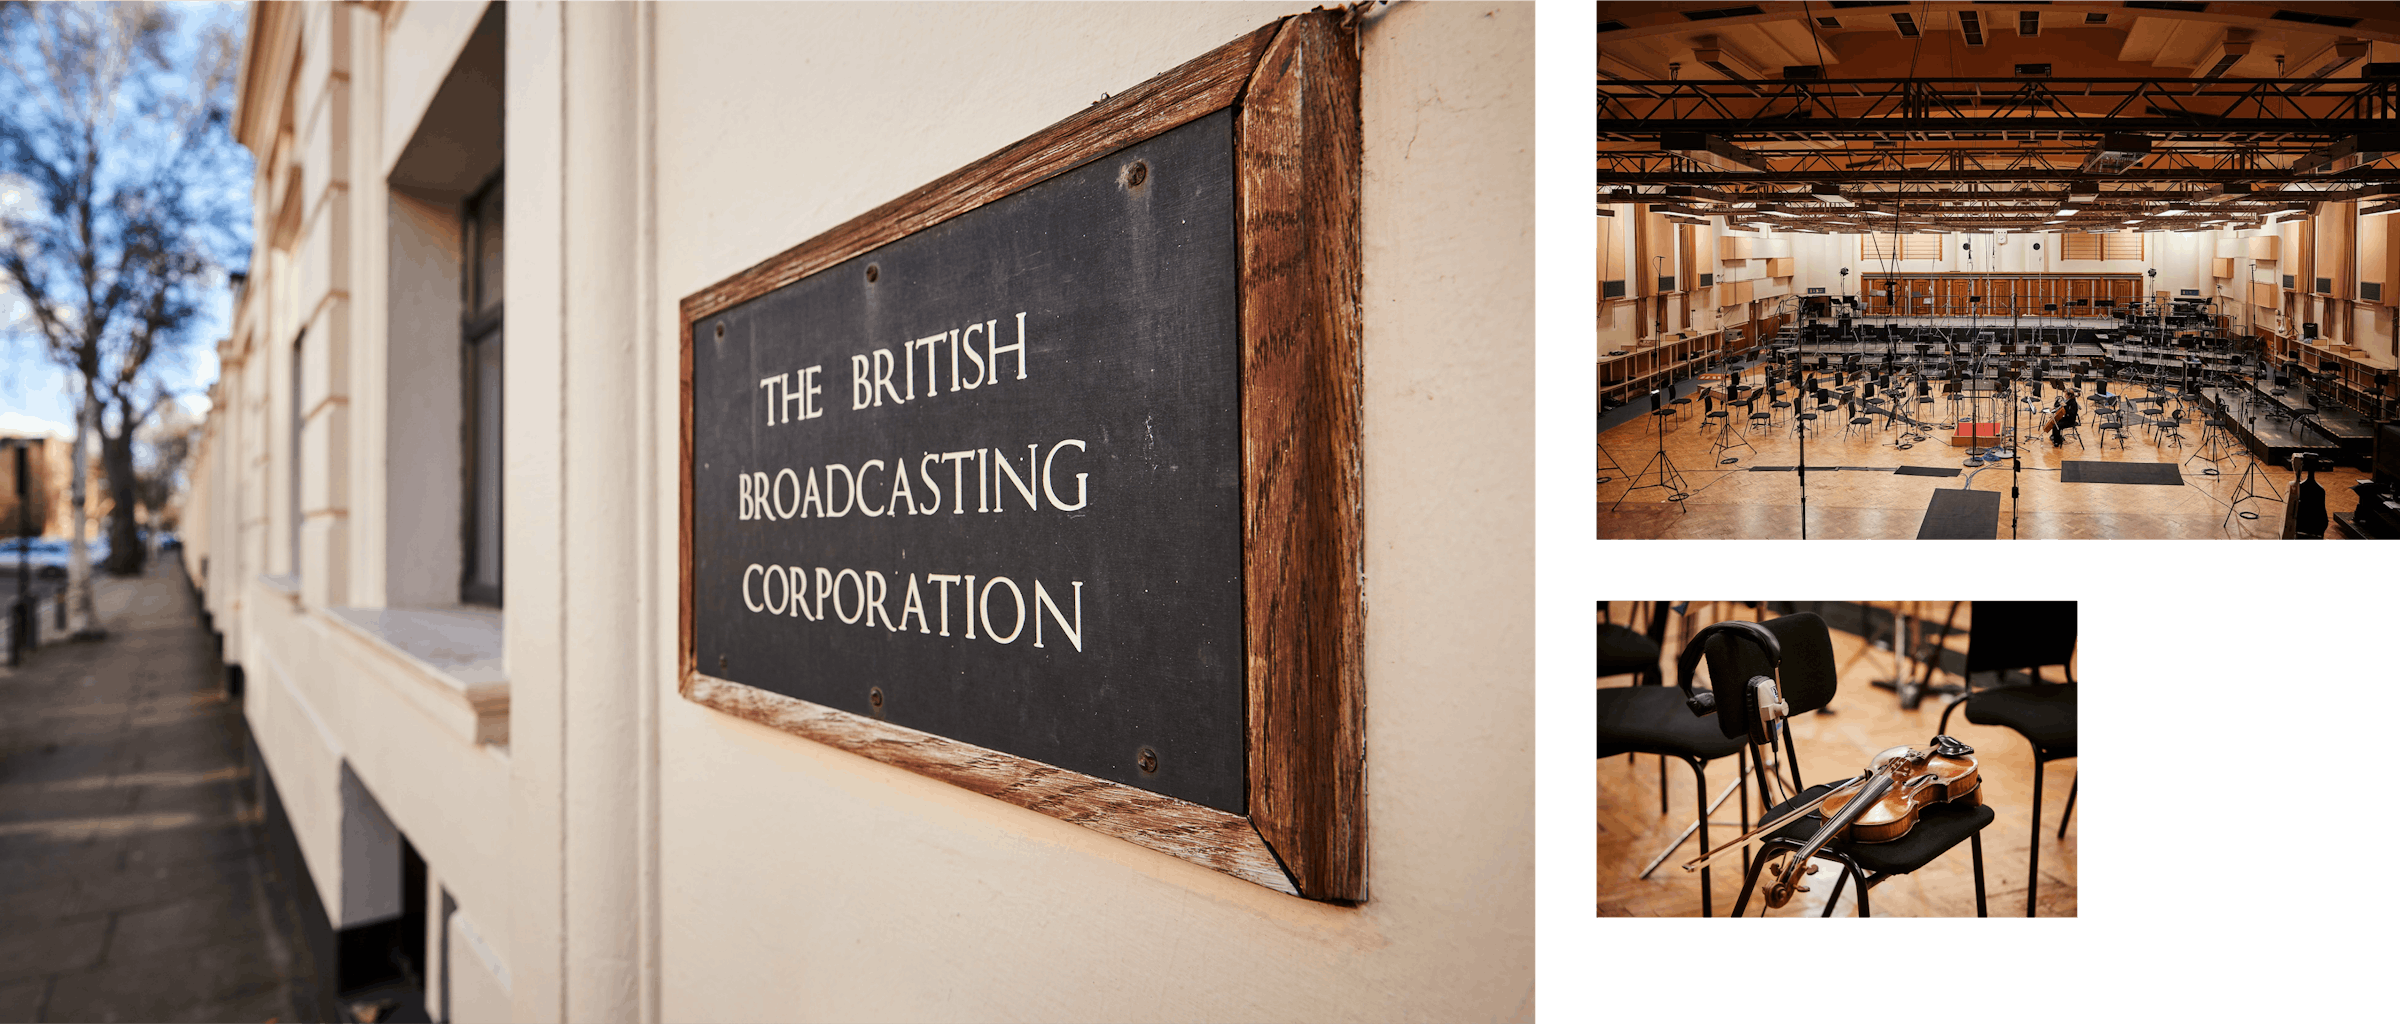 Left: "The British Broadcasting Corporation" sign. Top right: A wide image of the studio, filled with empty chairs and microphones. Bottom right: A violin and bow resting on a chair.